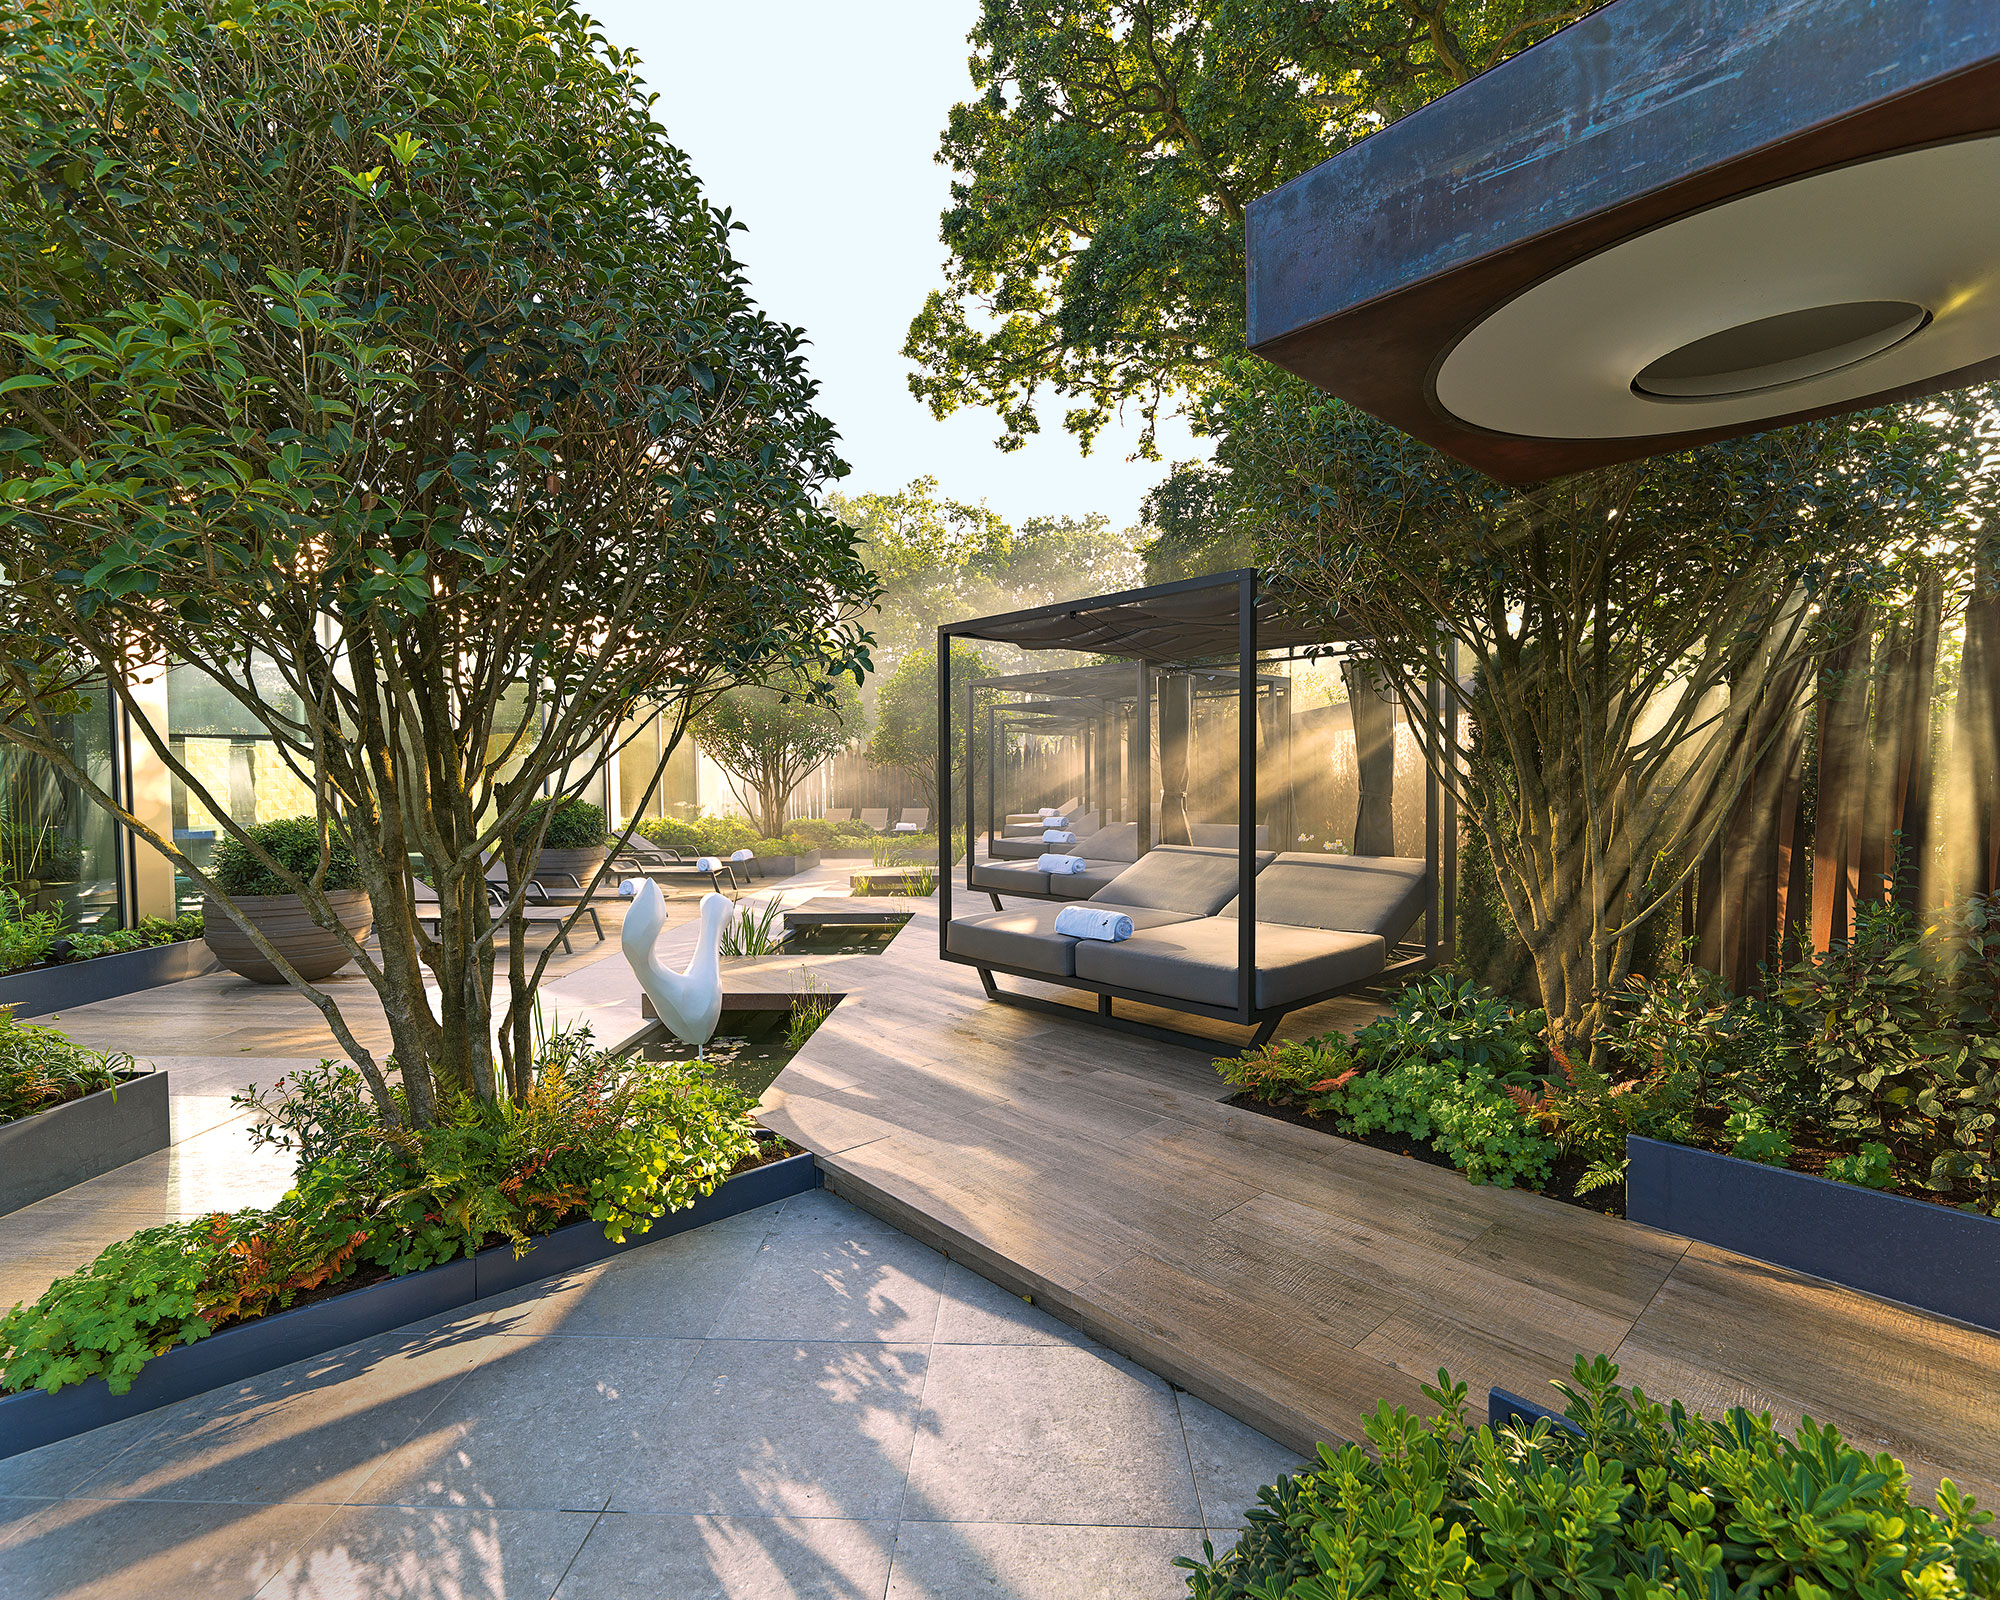 Modern, futuristic garden with stone paving, wooden decking, glass buildings, trees and planters